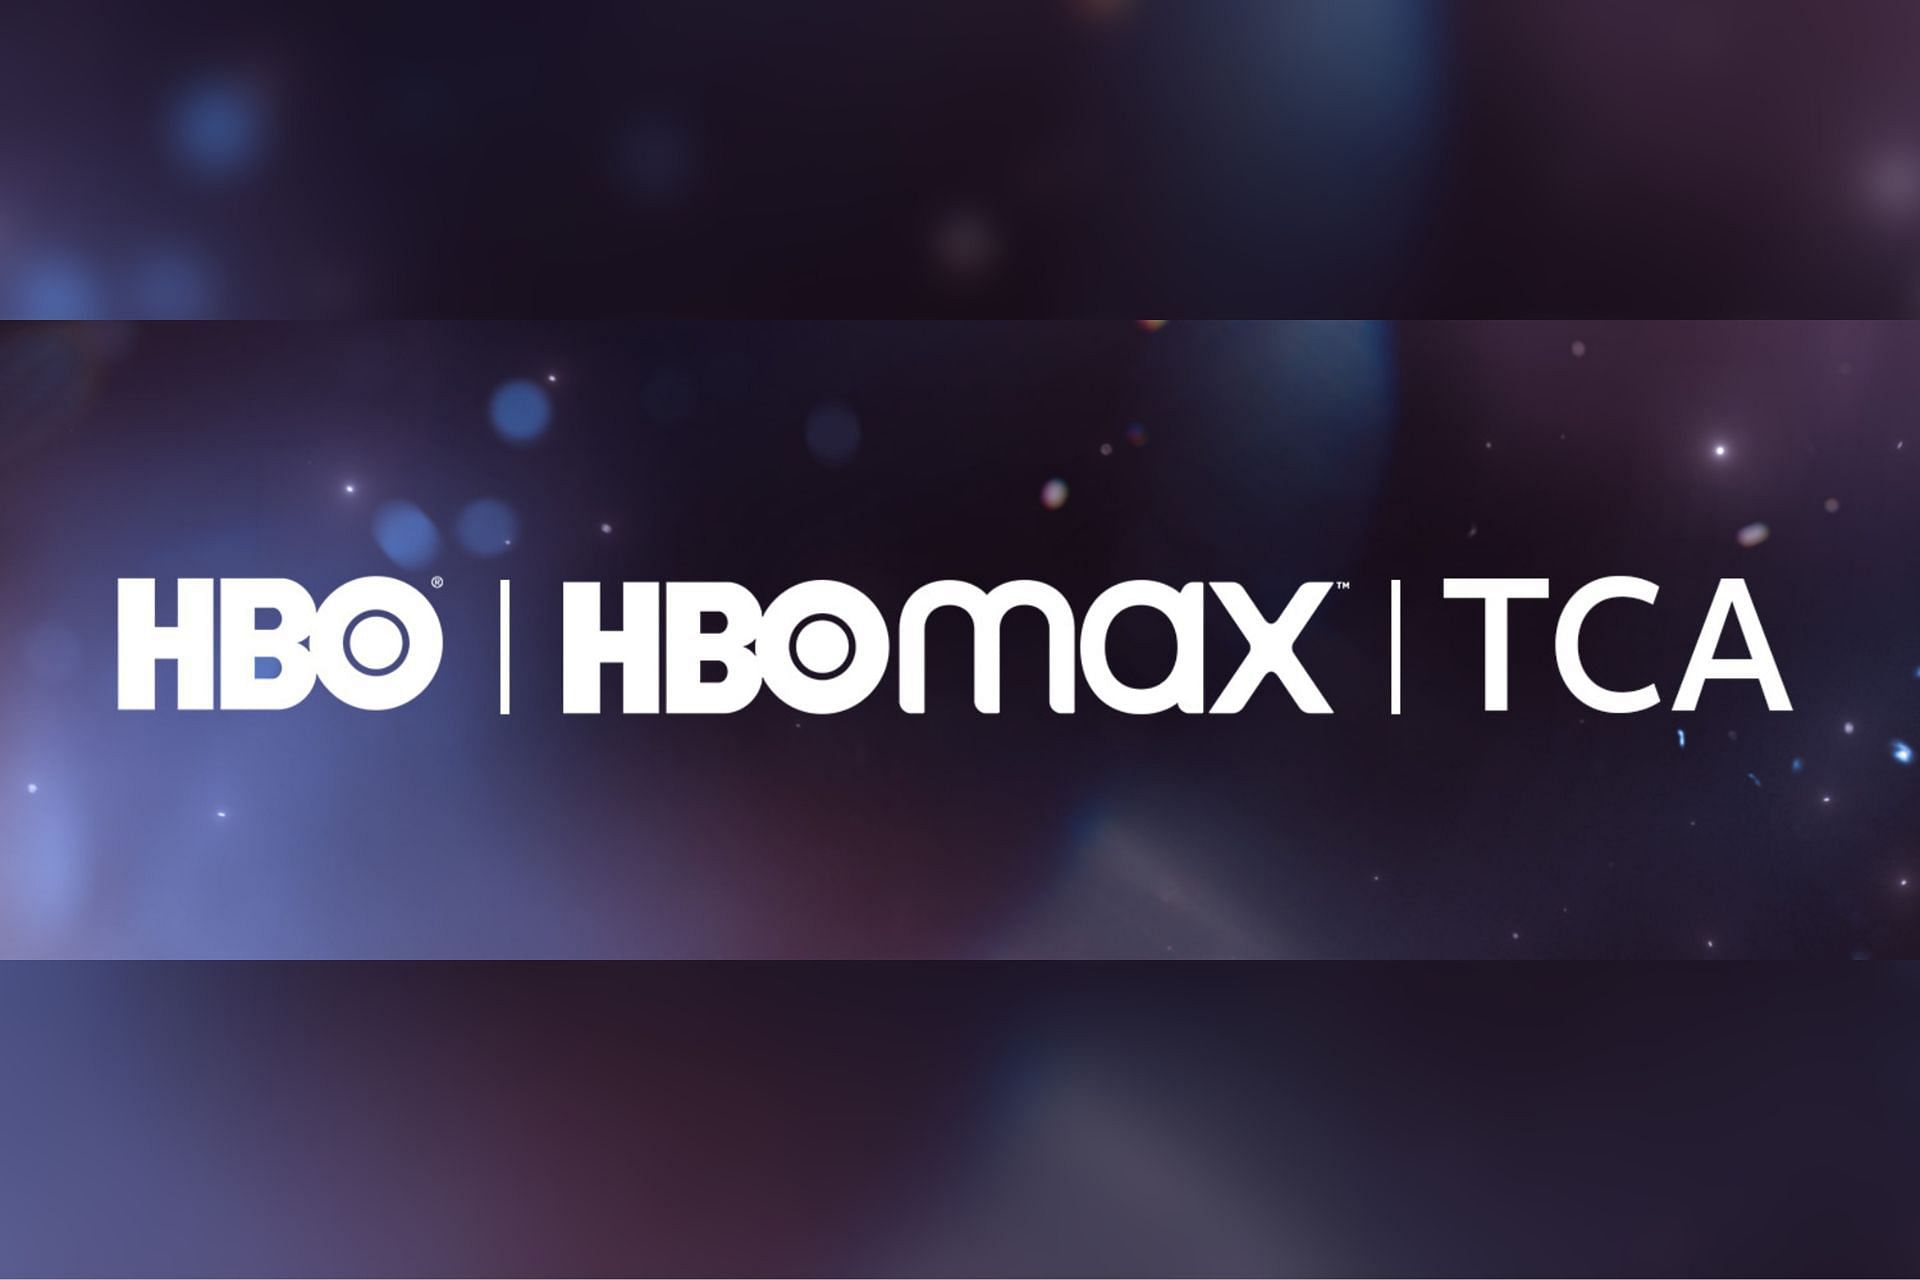 26 HBO Max Original Shows And Movies Pulled From The Service - GameSpot